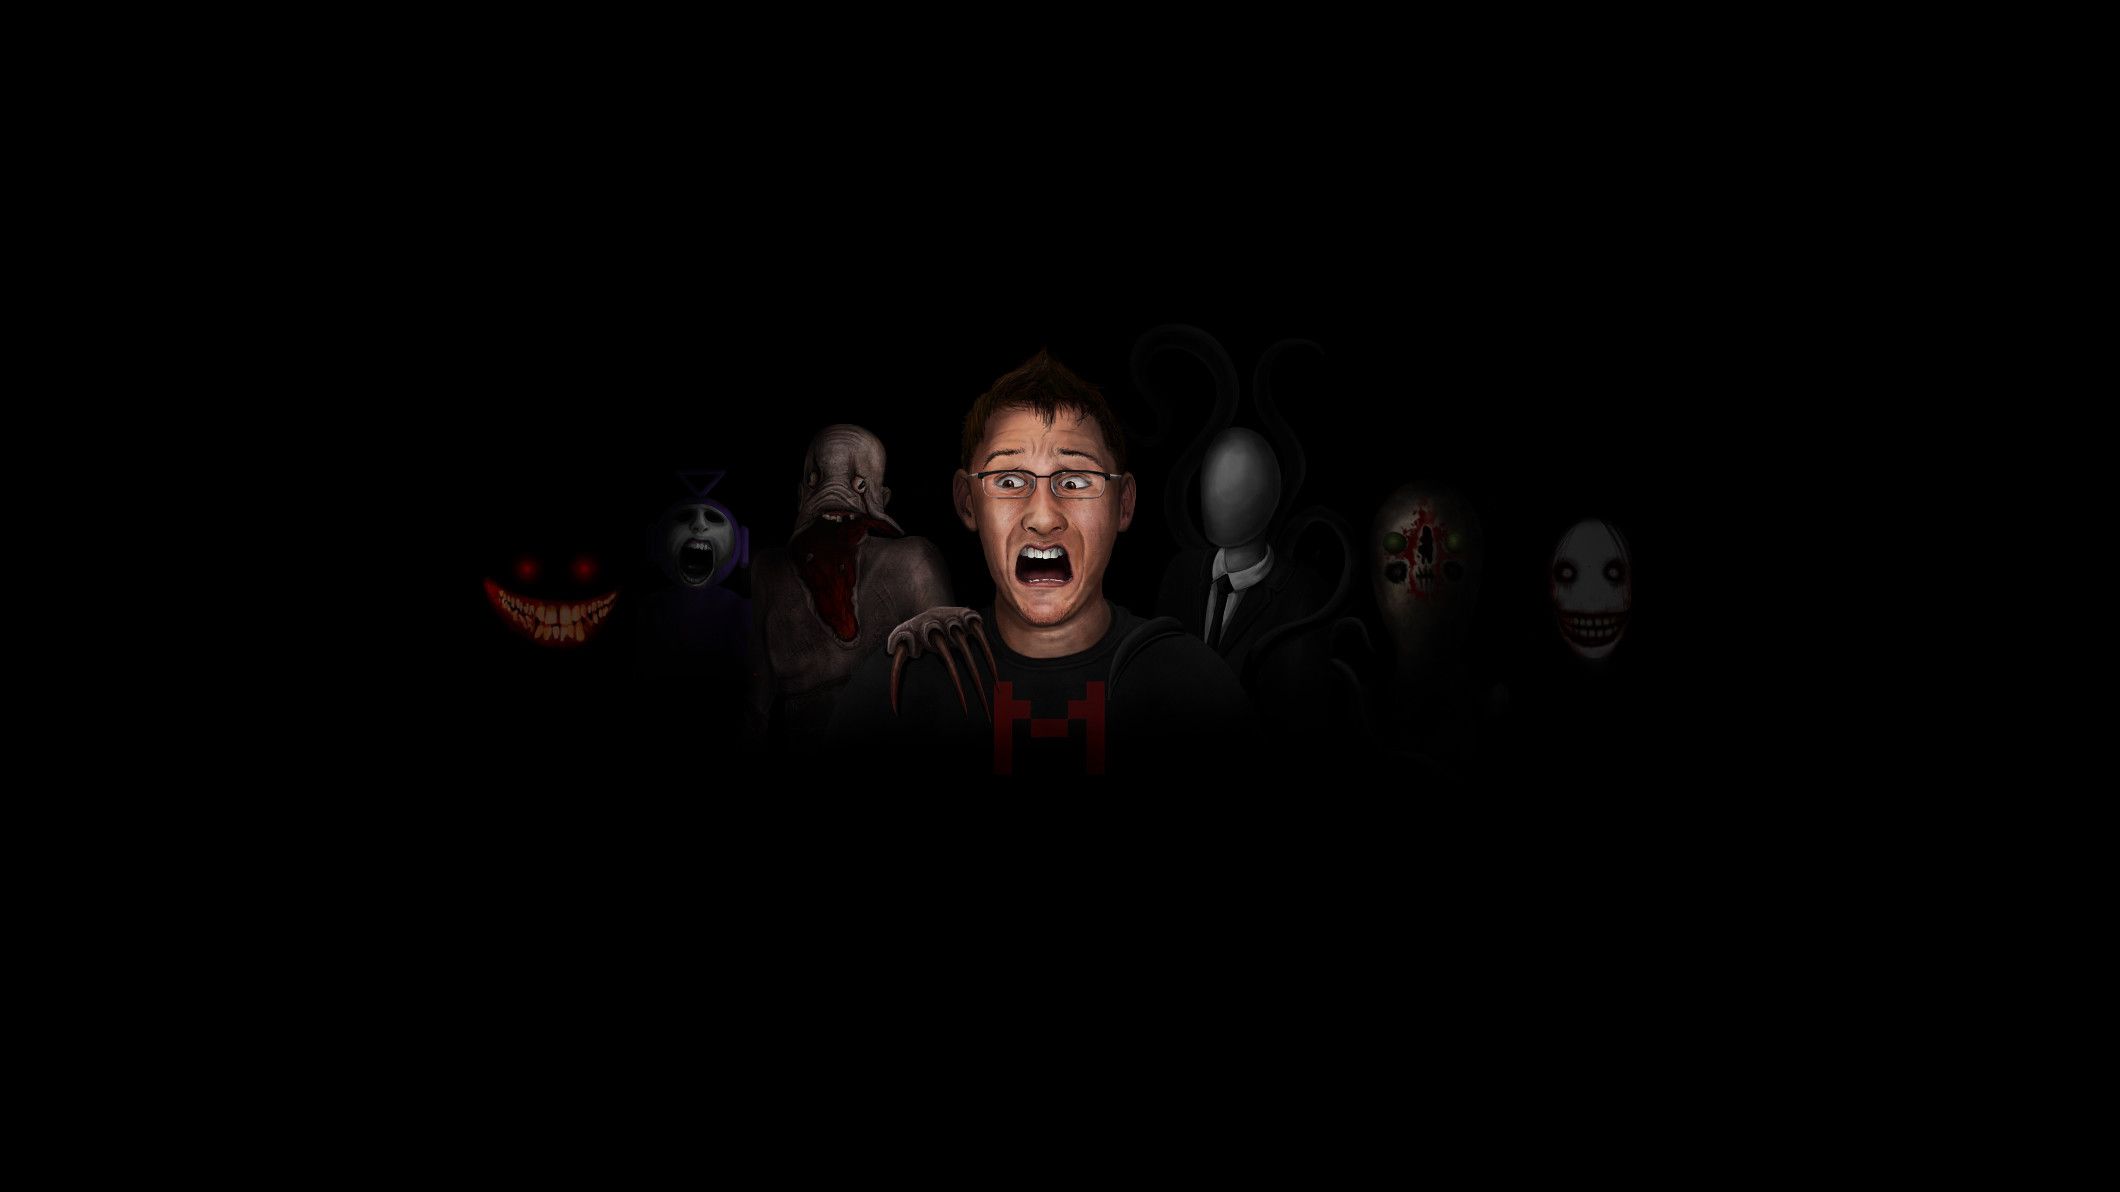 A man with glasses and a red and black checkered shirt with his mouth open in the center of the image with a black background. There are various horror characters surrounding him on the left and right side of the image. - Markiplier